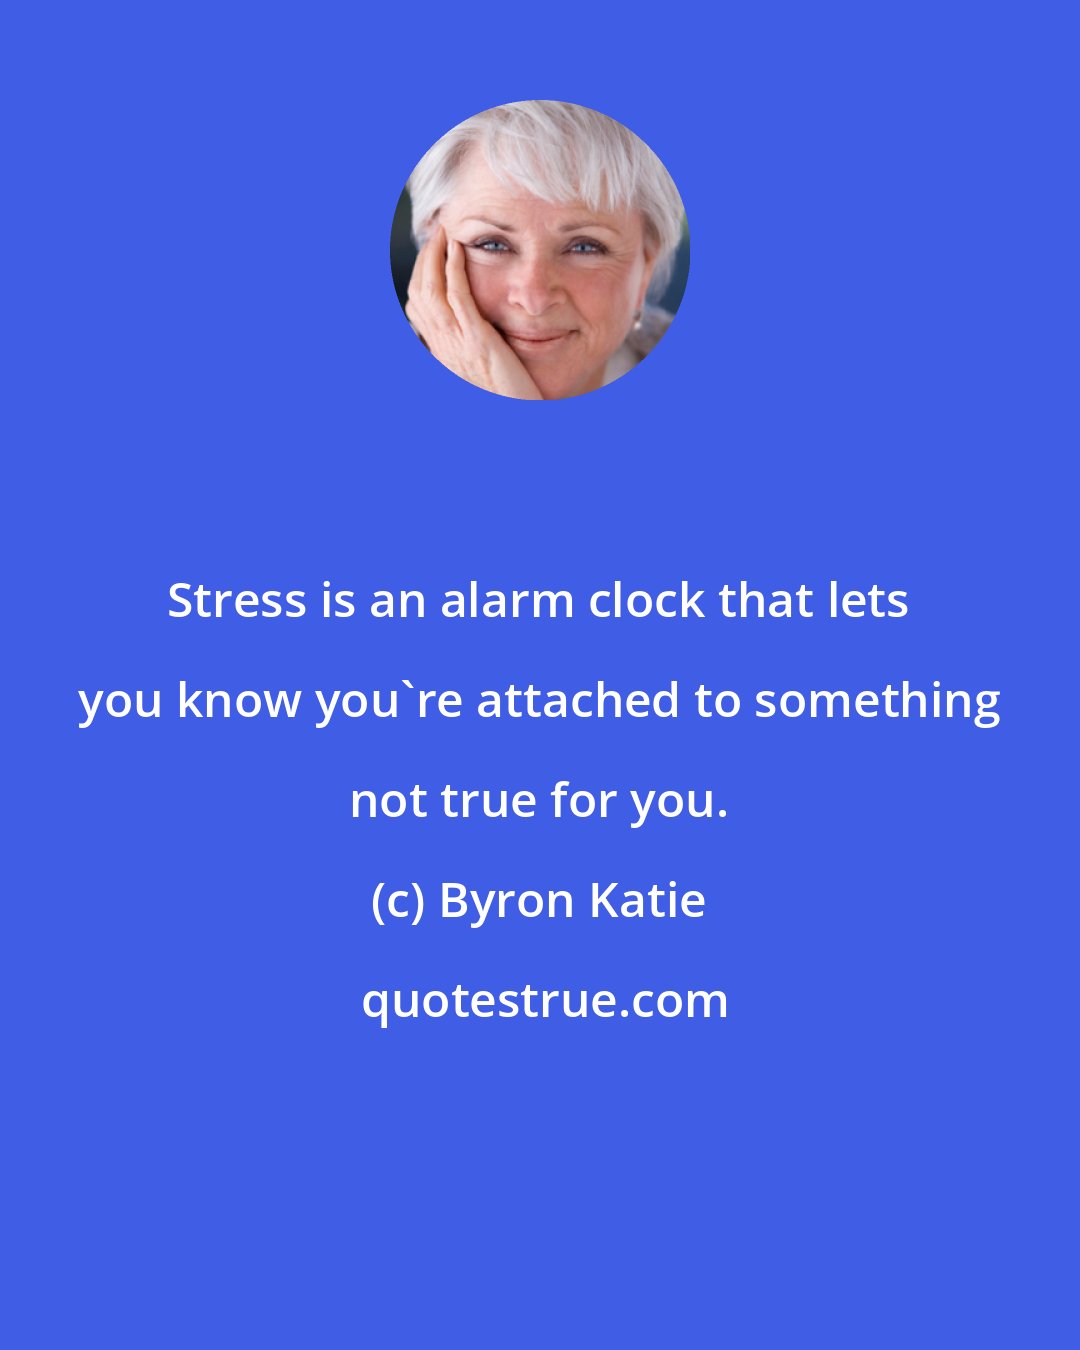 Byron Katie: Stress is an alarm clock that lets you know you're attached to something not true for you.